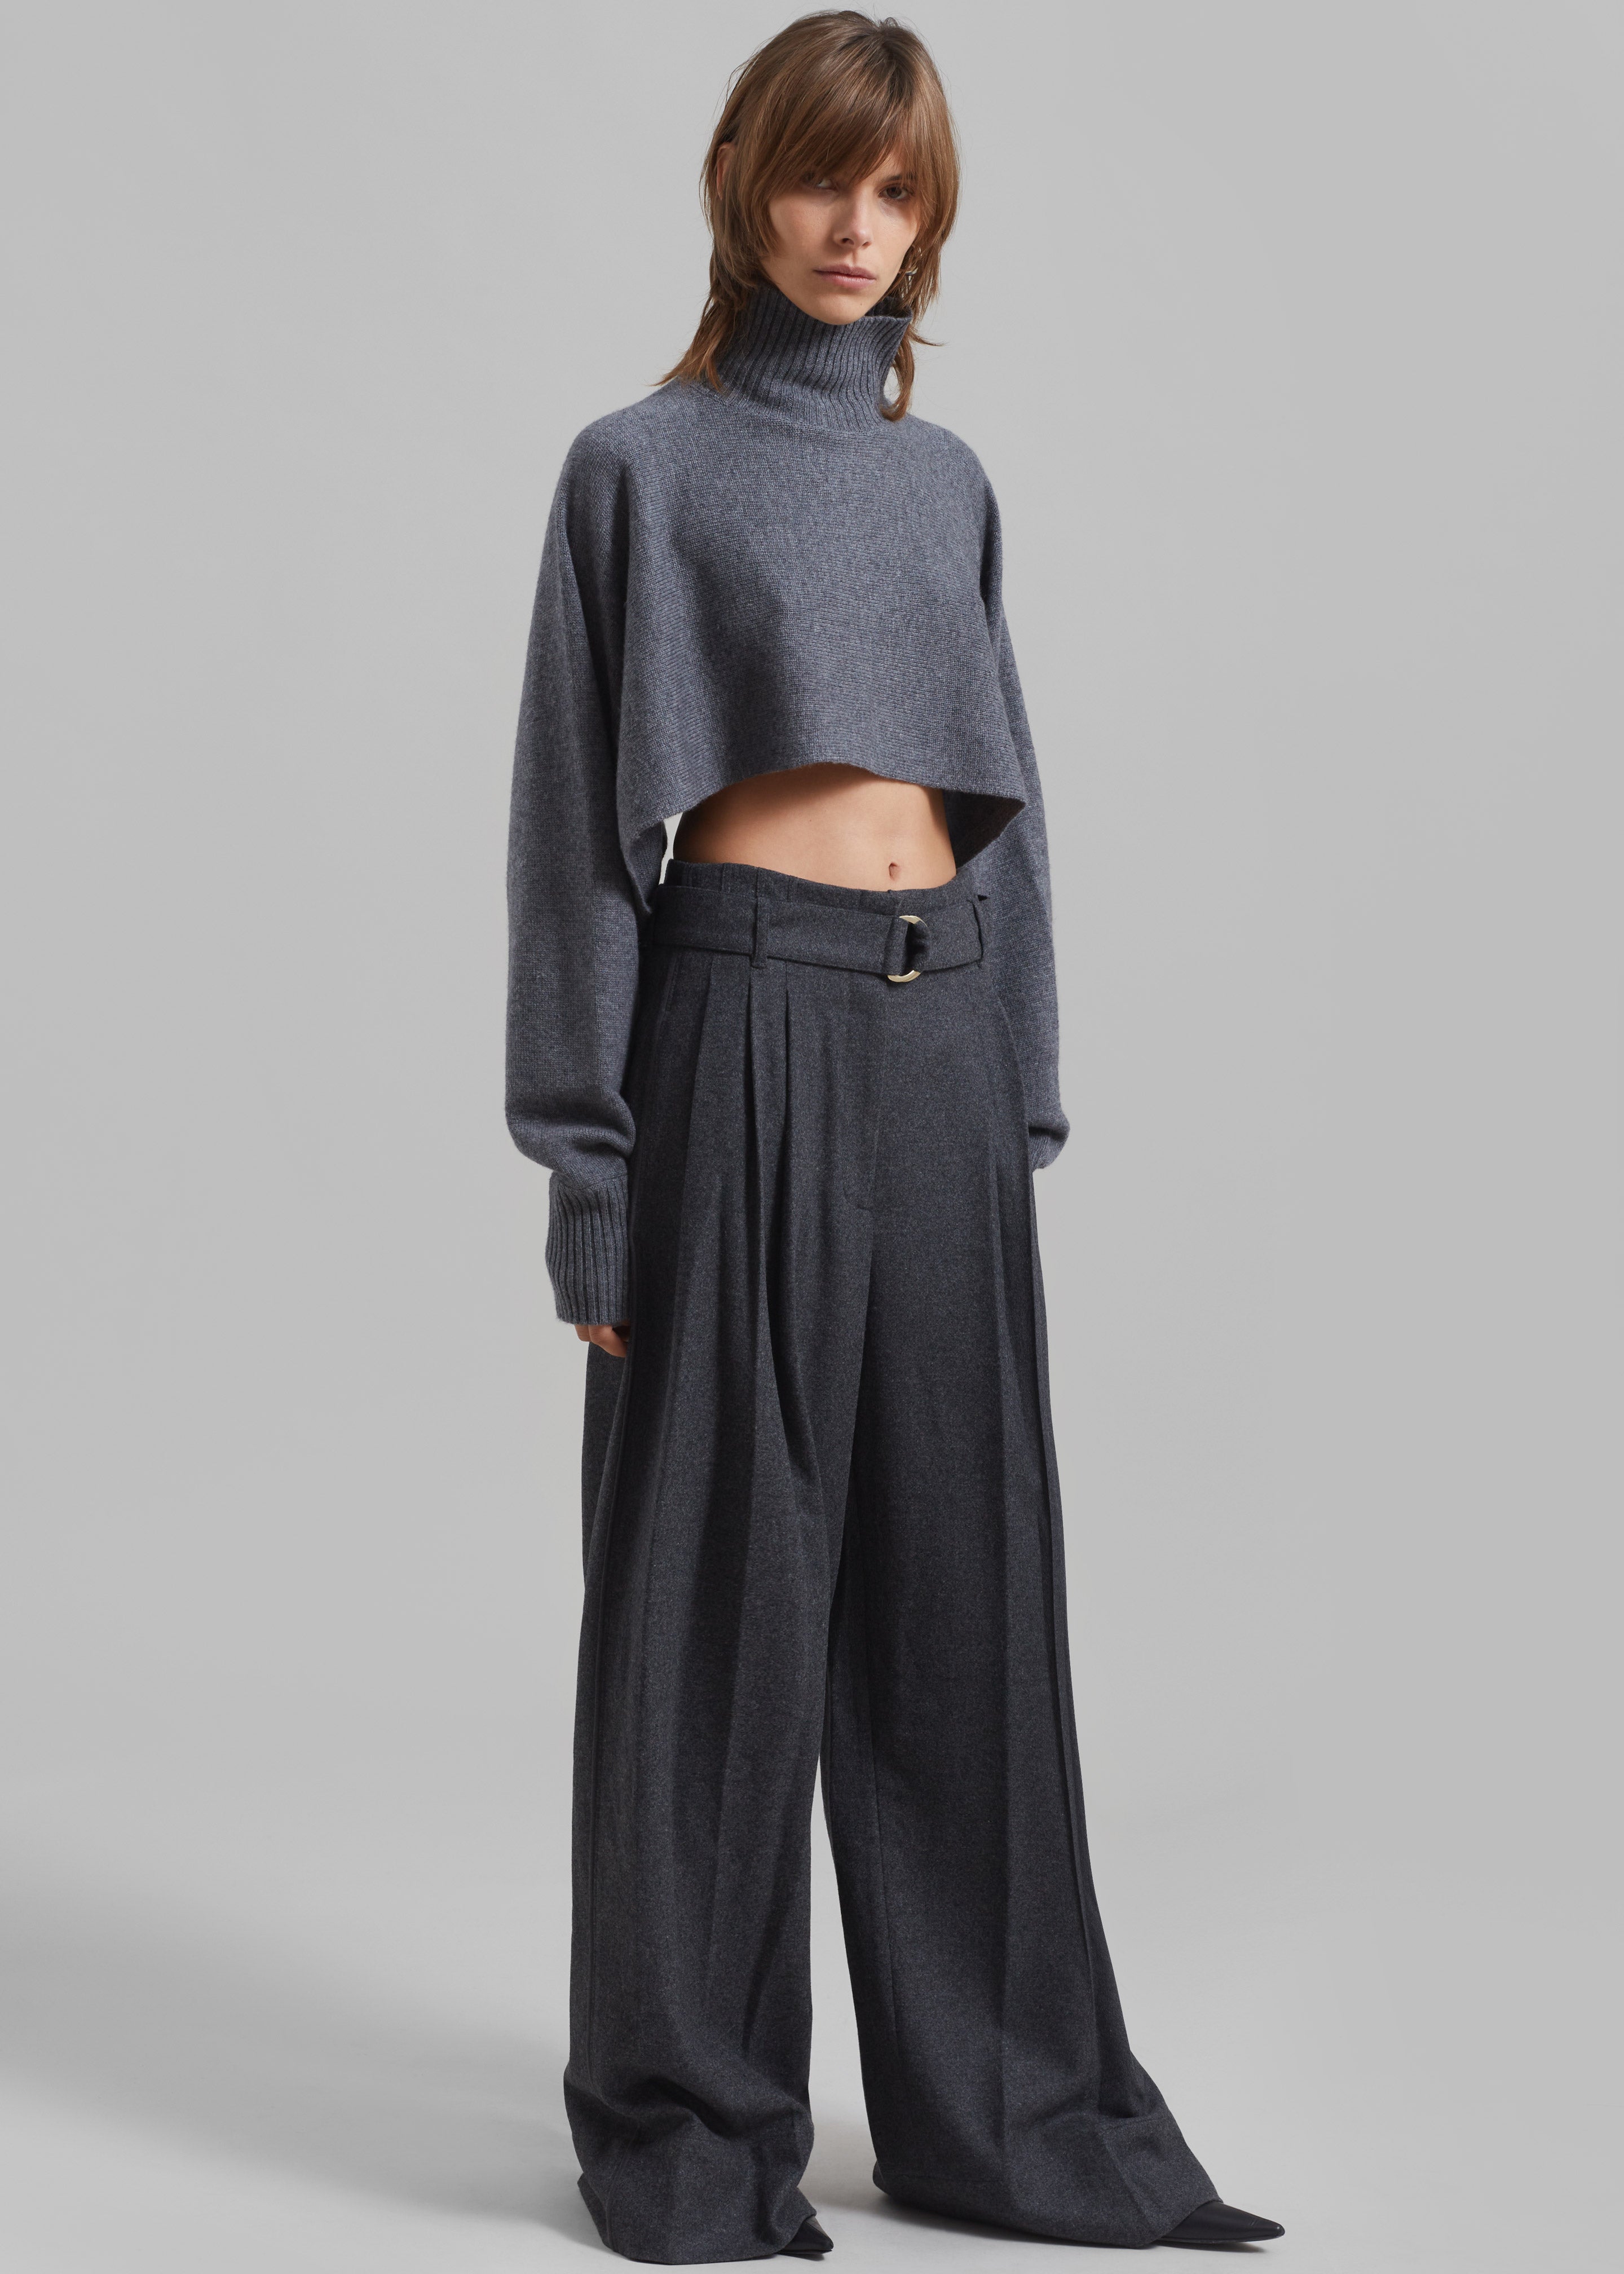 3.1 Phillip Lim Flannel Oversized Pleated Belted Pants - Charcoal - 6